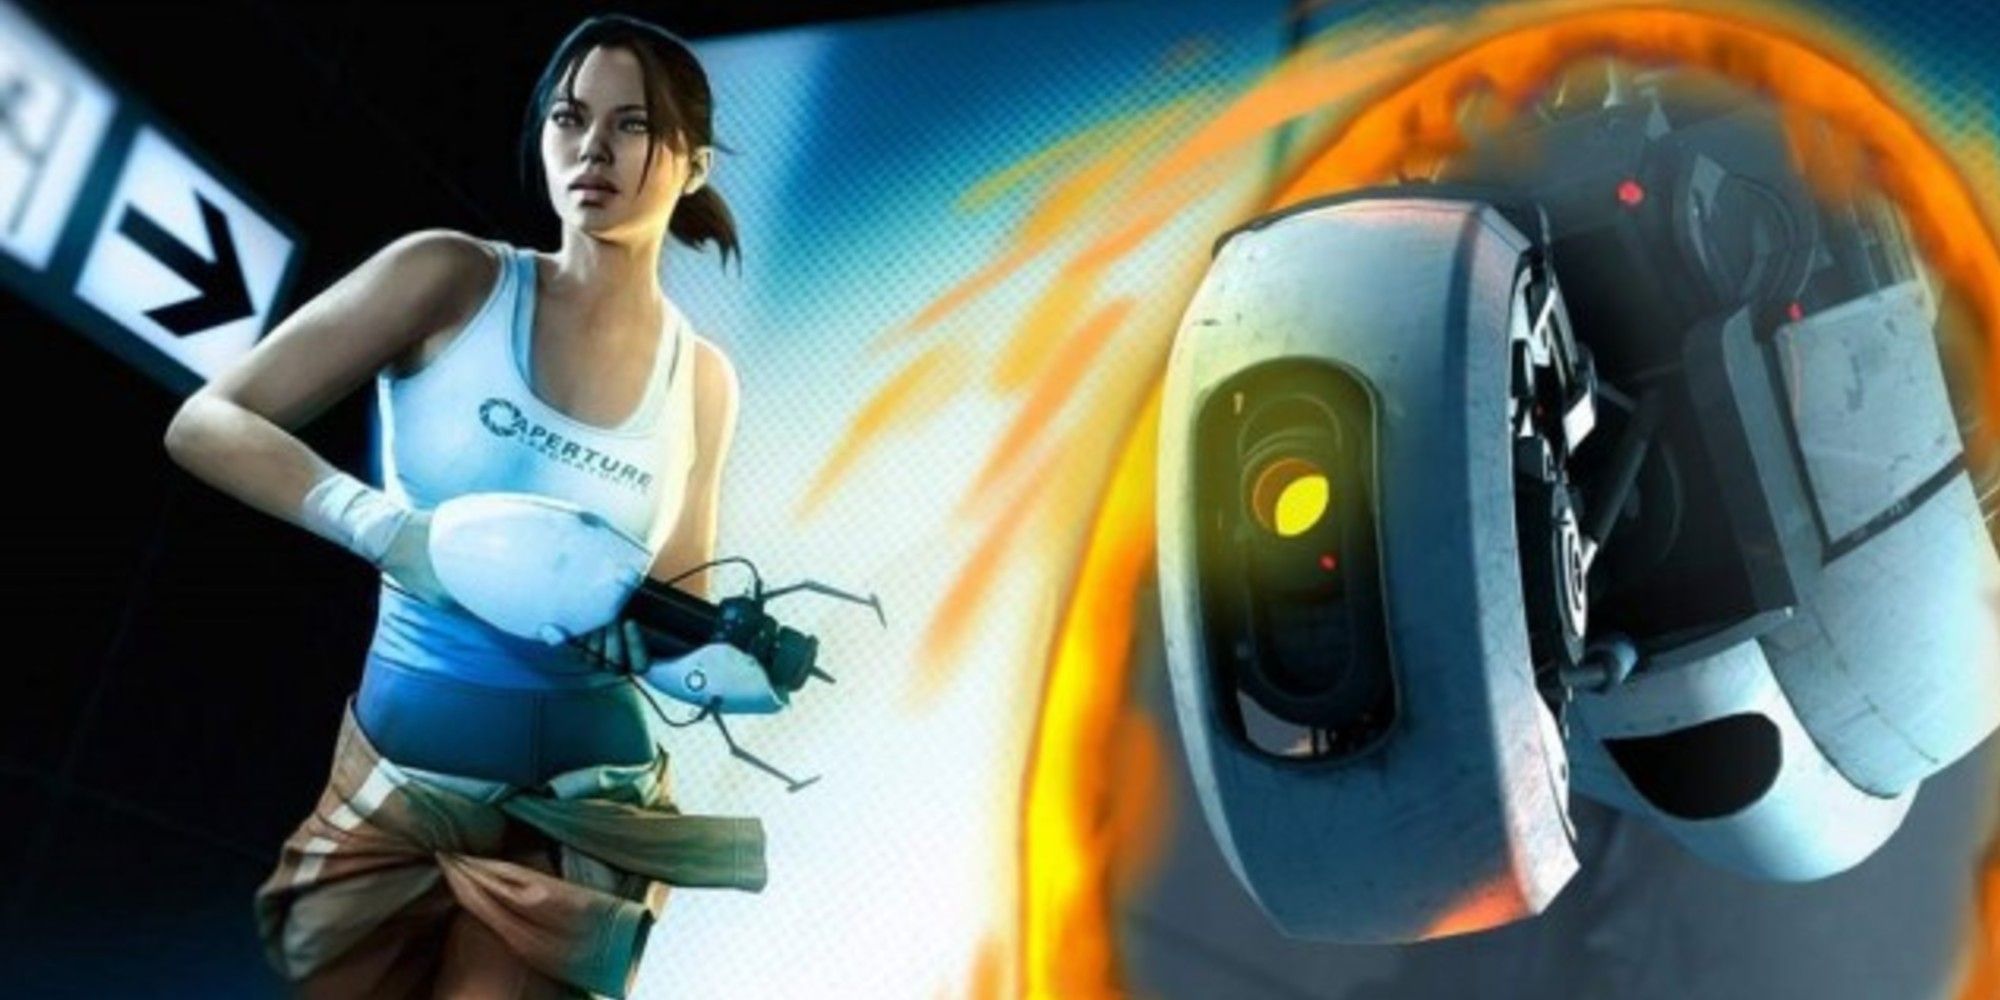 Image from Portal 2 Video Game.